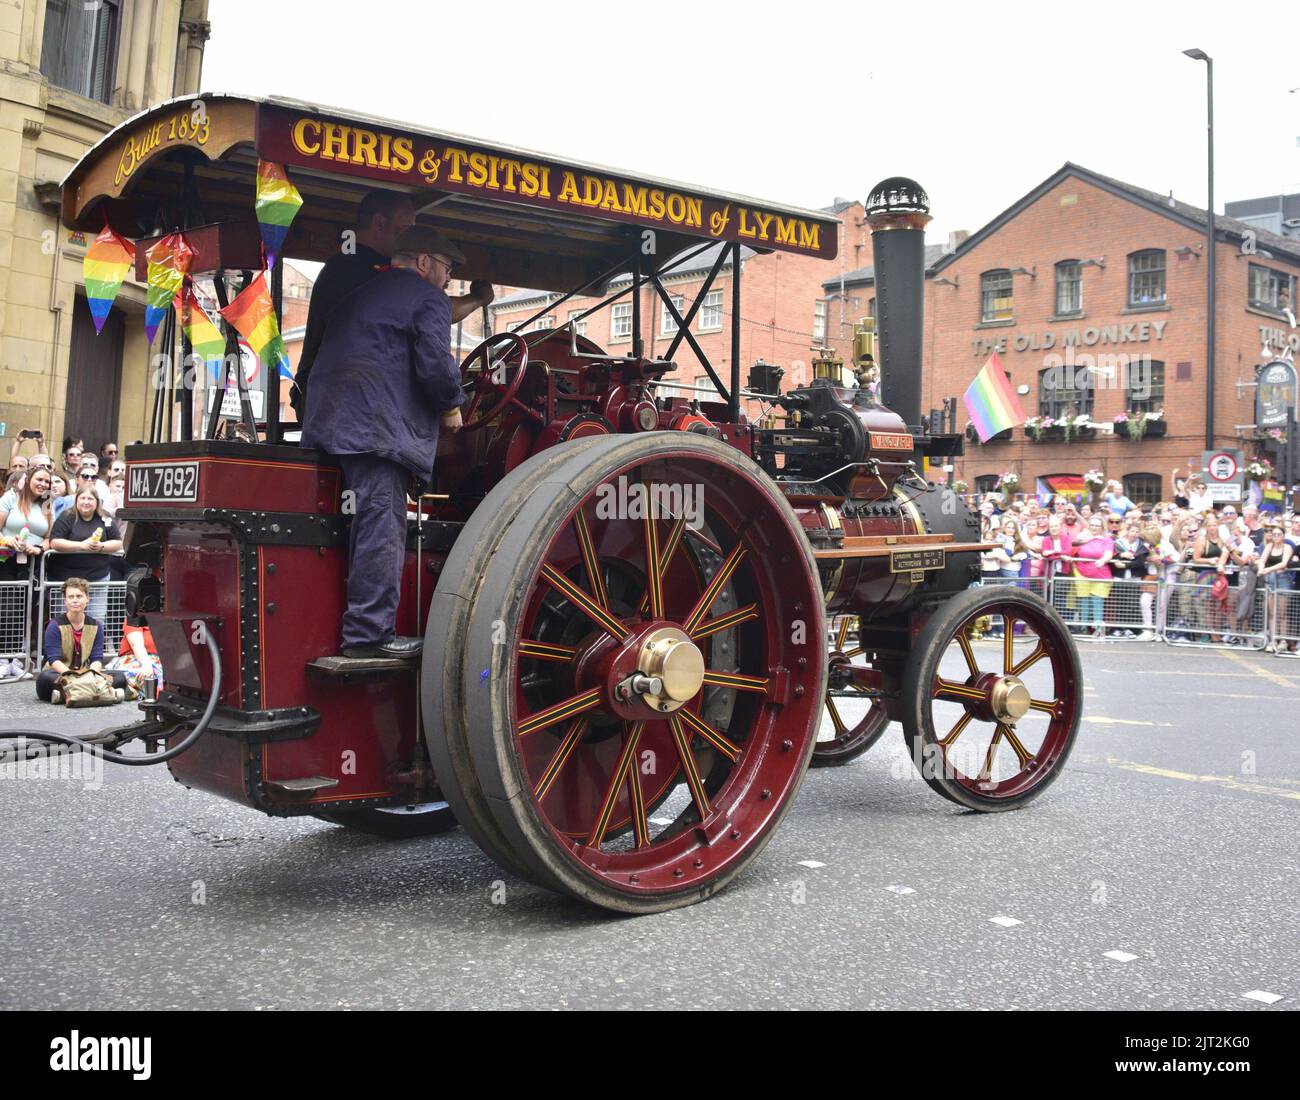 Manchester, UK. 27th August, 2022. A steam powered wagon carries text: 'Chris and Tsitsi Adamson of Lymm'.  Participants take part in the LGBTQ+ Pride parade, central Manchester, UK, as LGBTQ+ Pride continues over the Bank Holiday weekend 26th to 29th August. Organisers say: 'Manchester Pride is one of the UK's leading LGBTQ+ charities. Our vision is a world where LGBTQ+ people are free to live and love without prejudice. We’re part of a global Pride movement celebrating LGBTQ+ equality and challenging discrimination.' Credit: Terry Waller/Alamy Live News Stock Photo